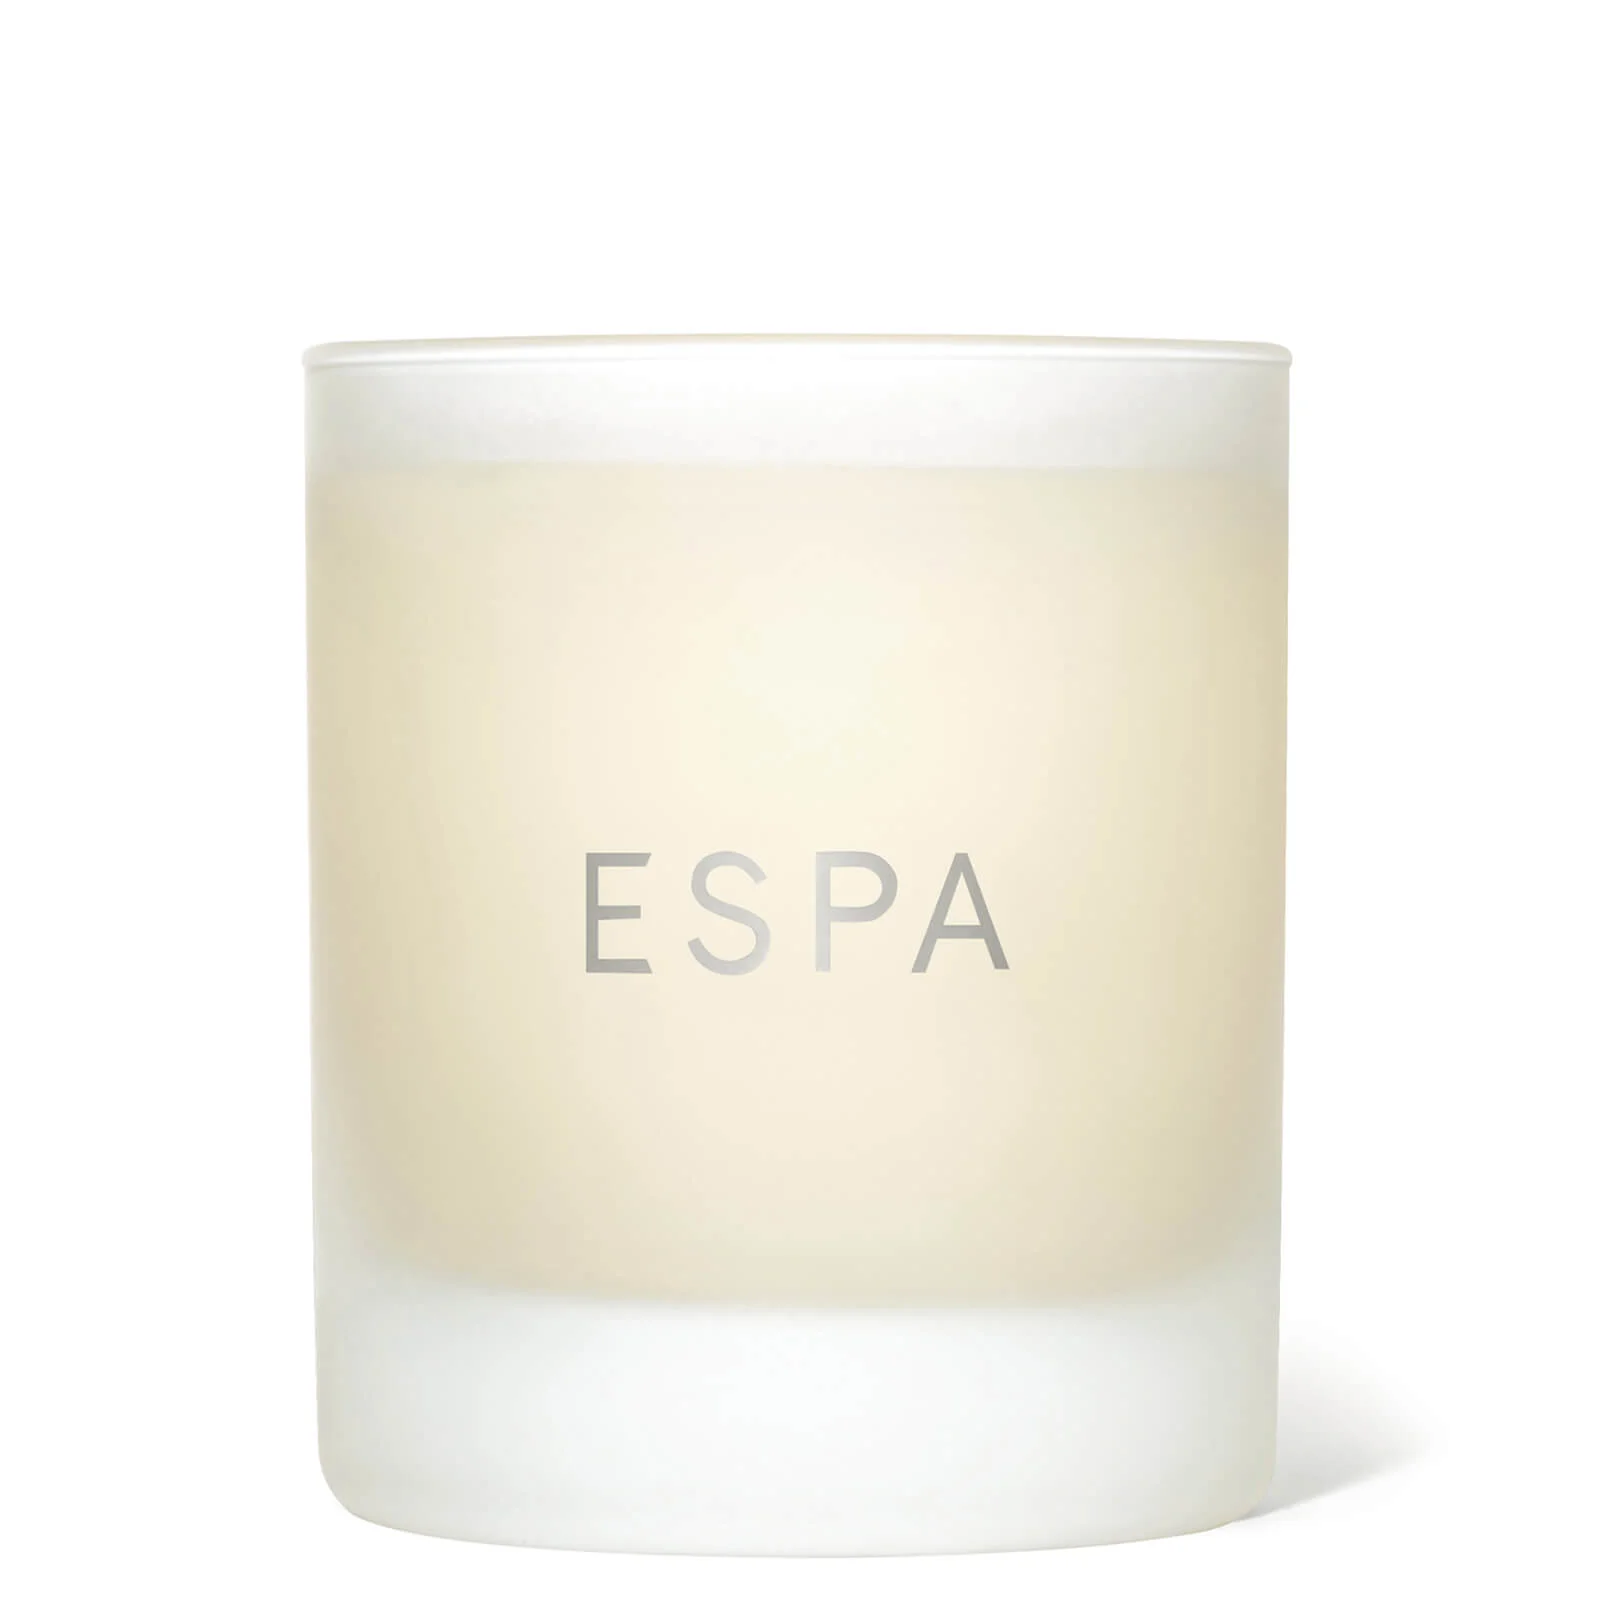 ESPA Soothing Candle 200g Image 1